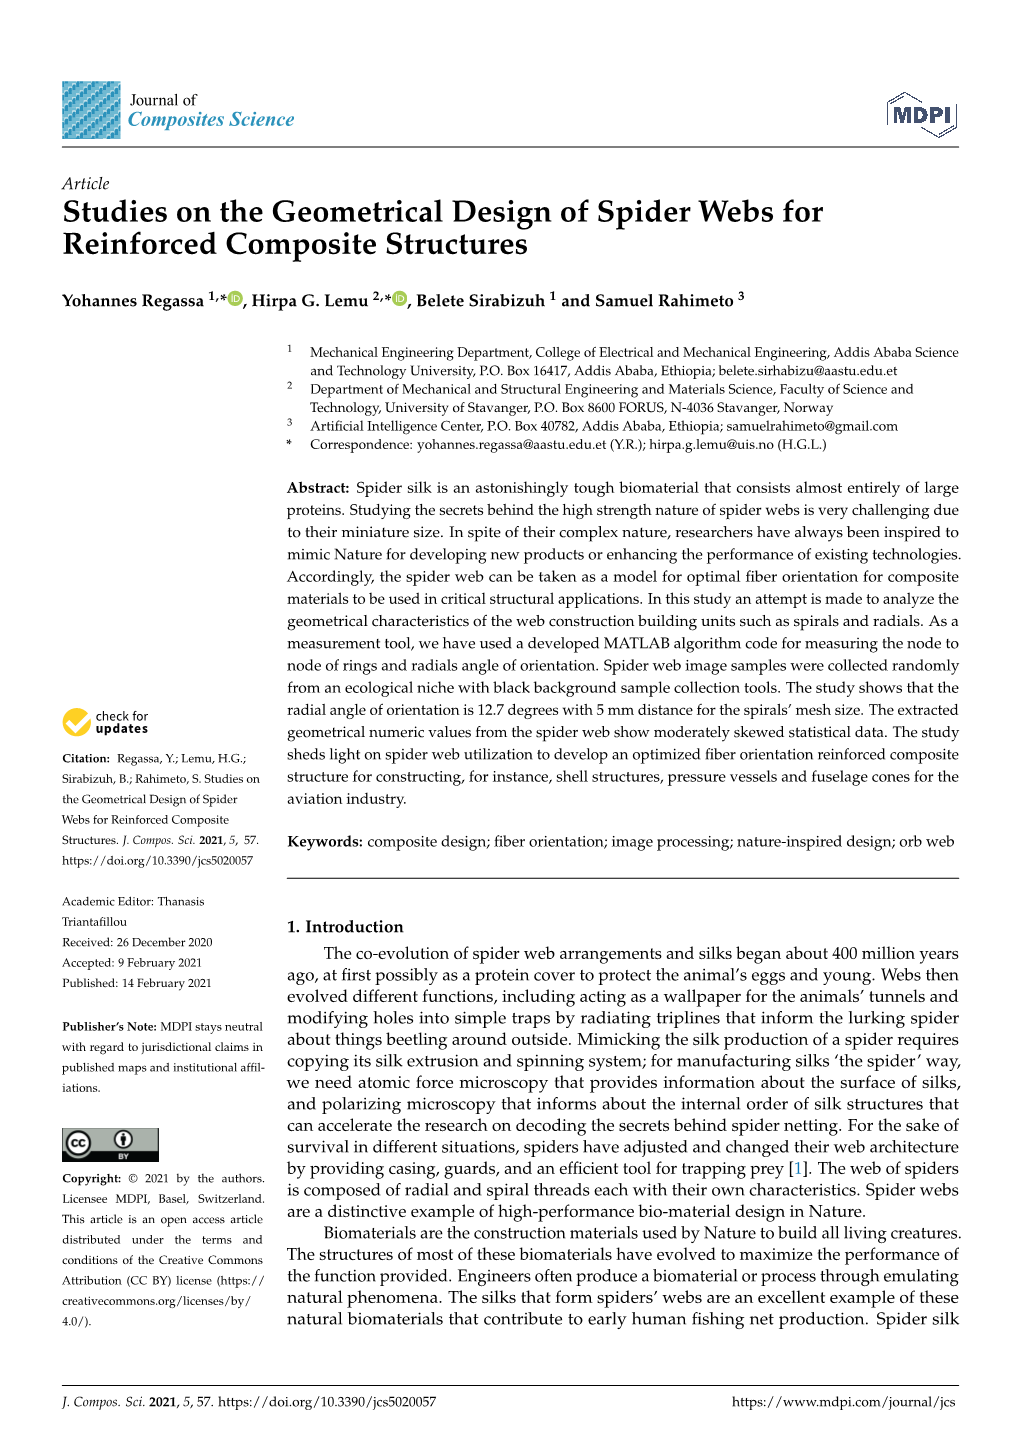 Studies on the Geometrical Design of Spider Webs for Reinforced Composite Structures